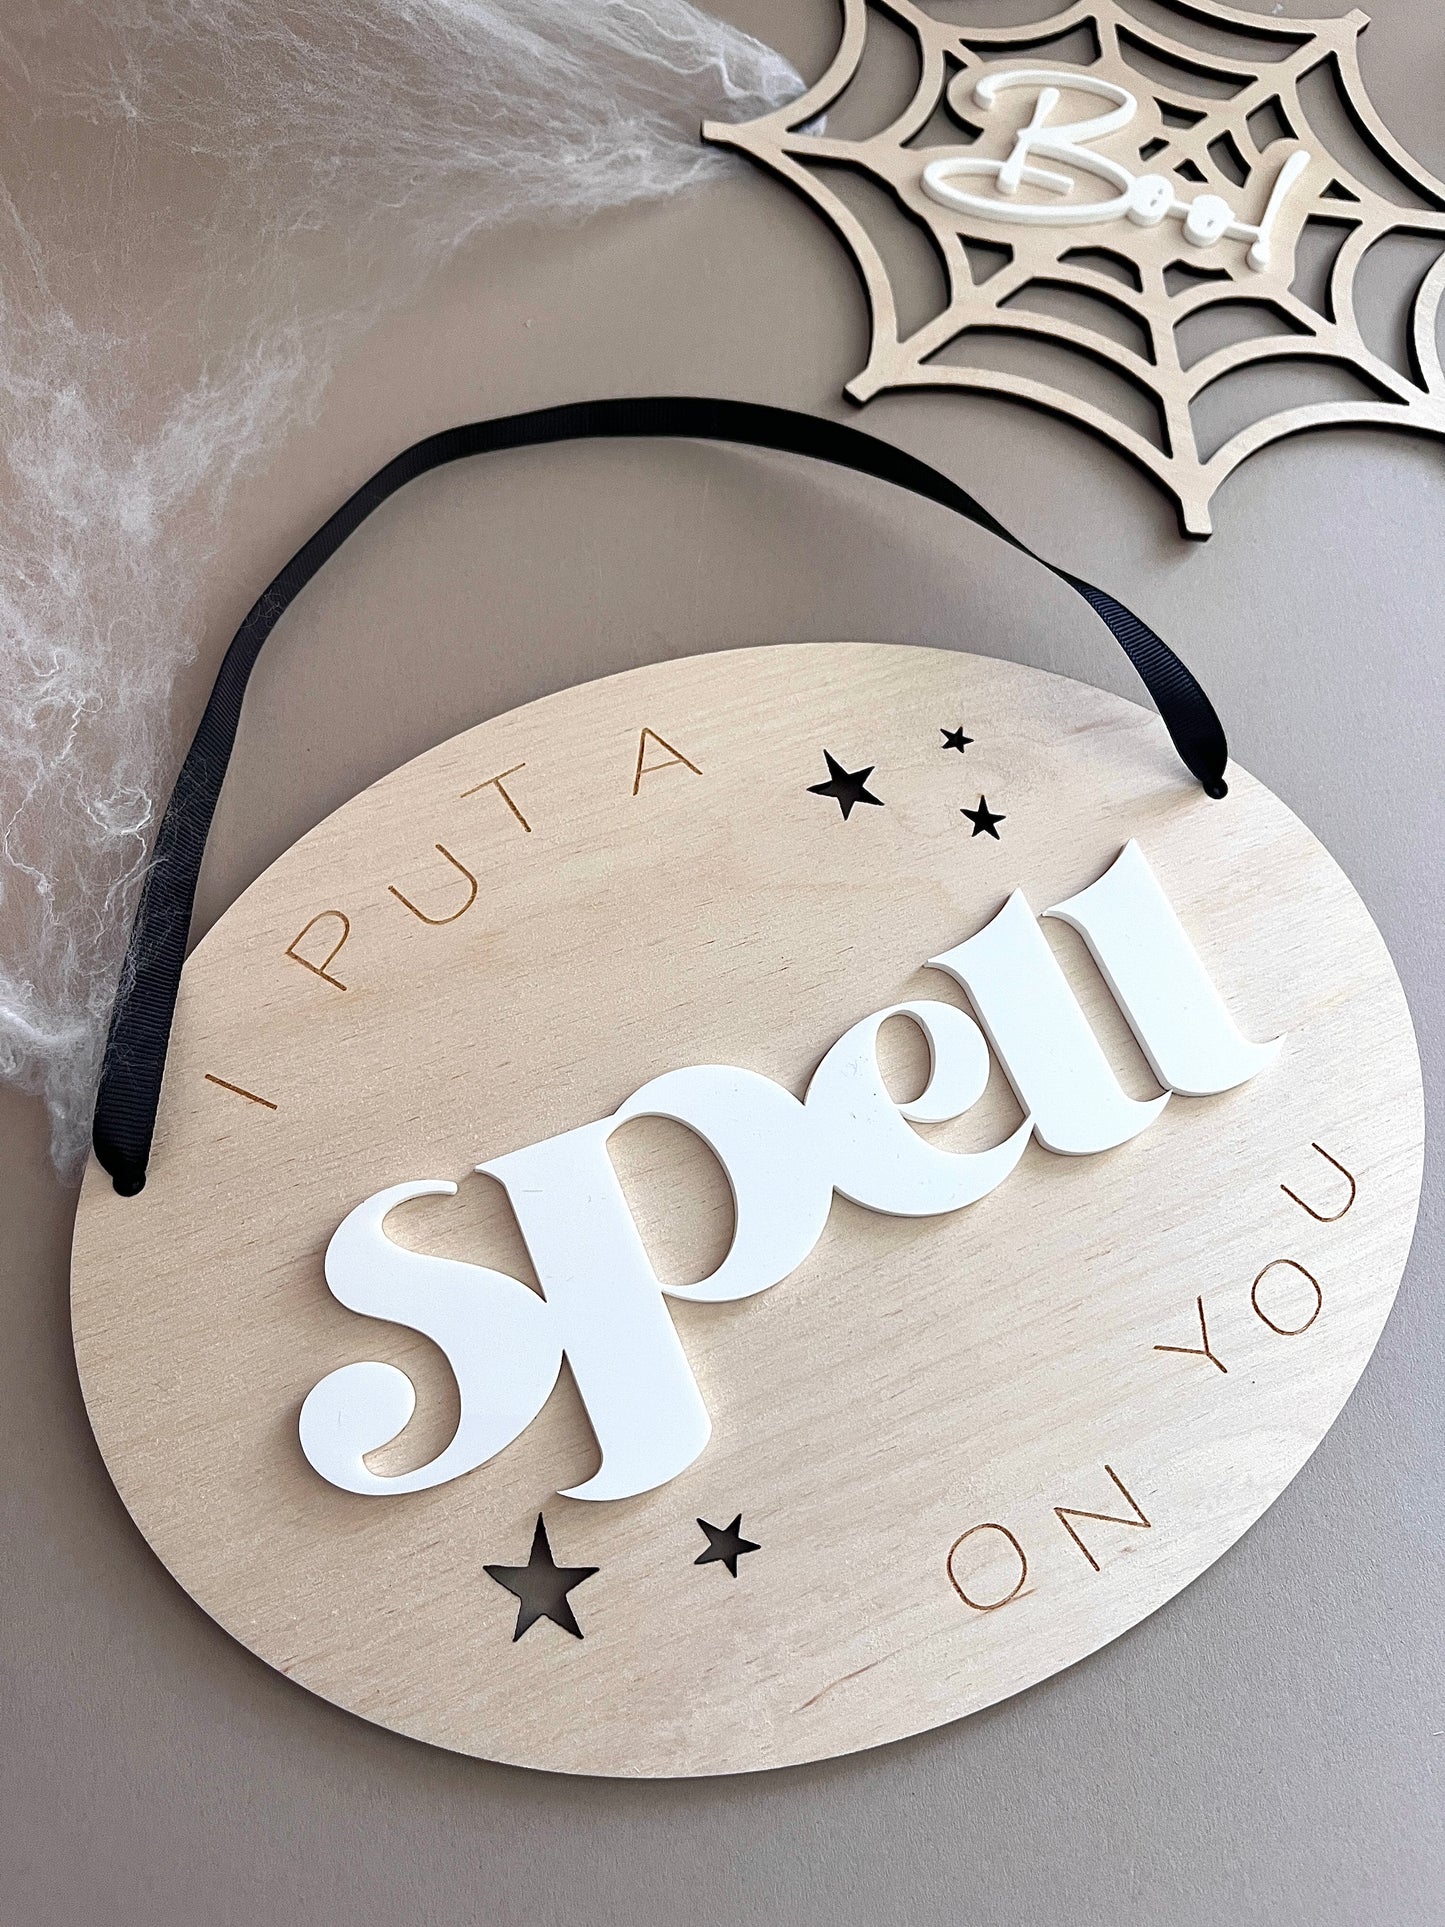 I put a spell on you wall decor, wooden flag, Halloween decor